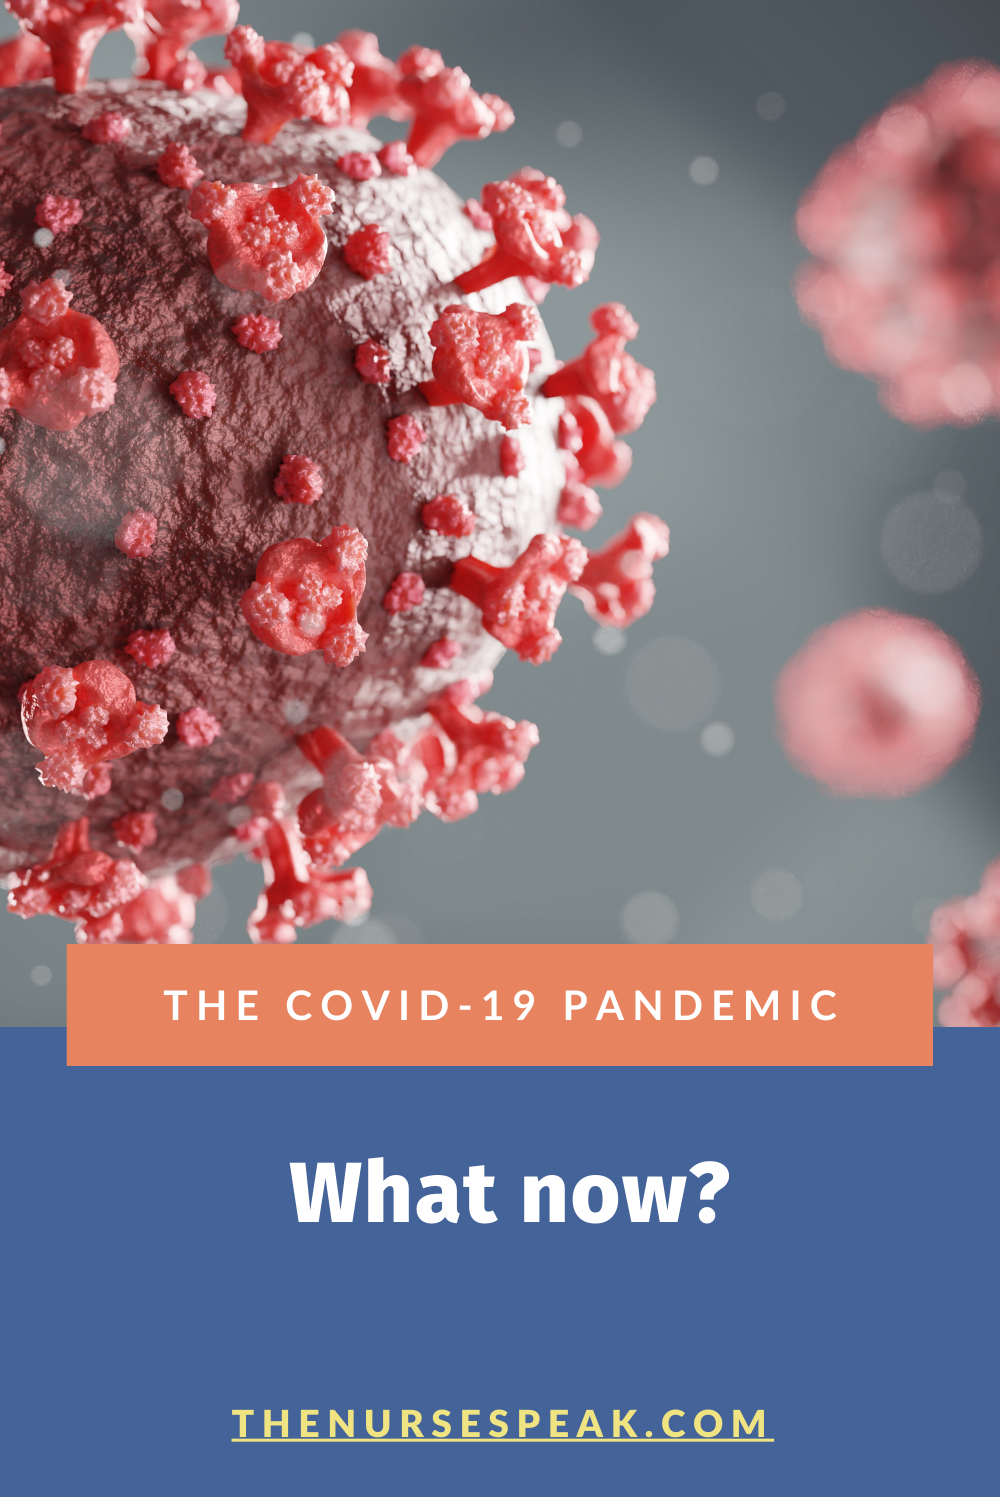 The COVID-19 Pandemic & NCLEX: What Now?